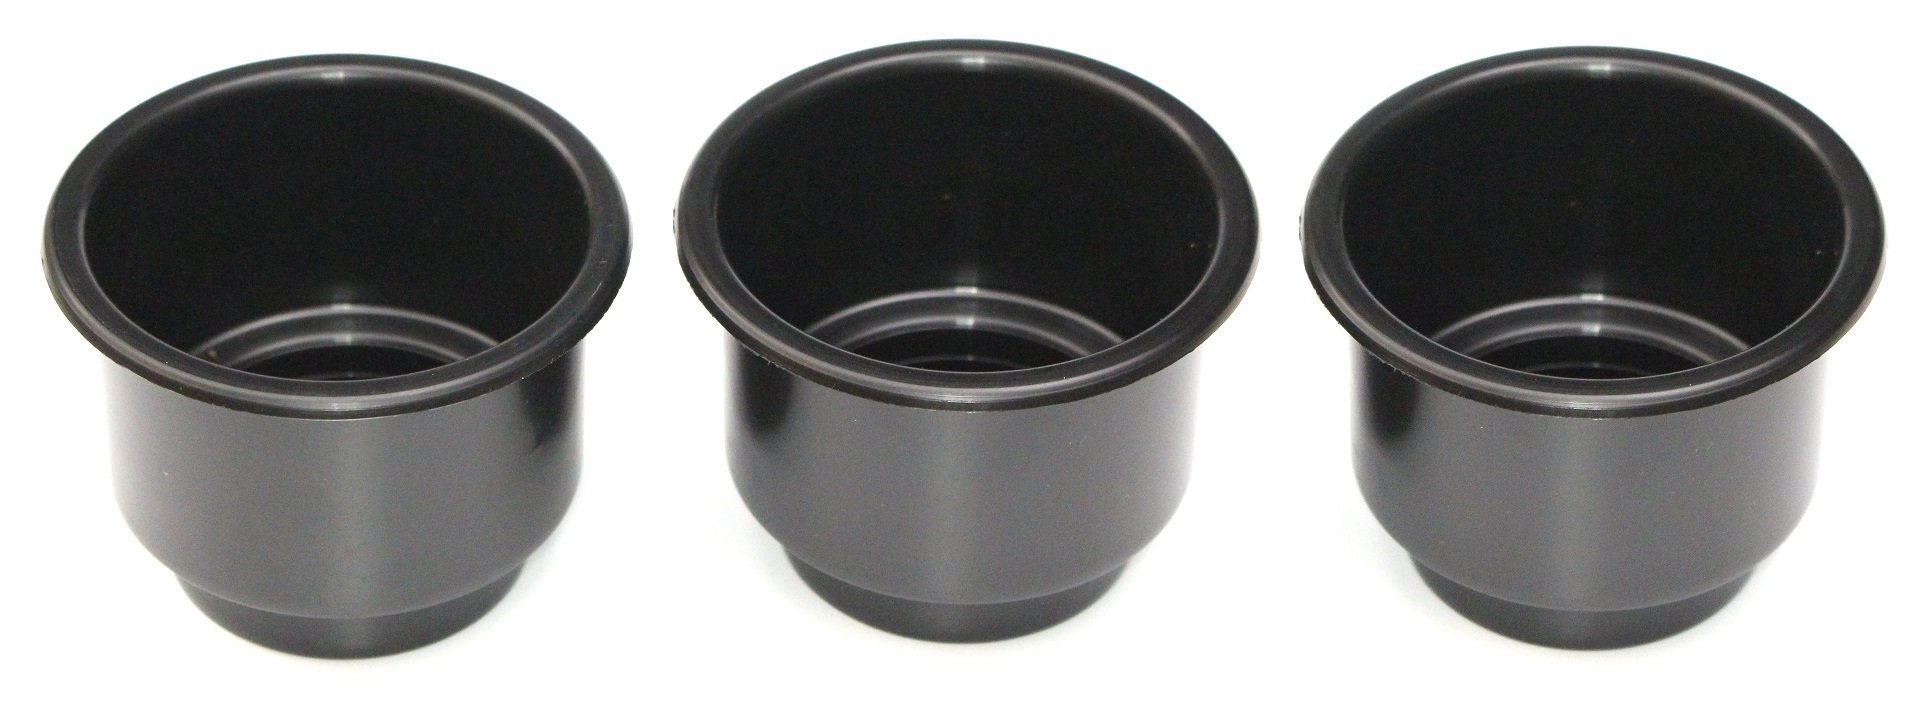 Regular Size Black Single Plastic Cup Holder Boat RV Car Truck Couch  Inserts 